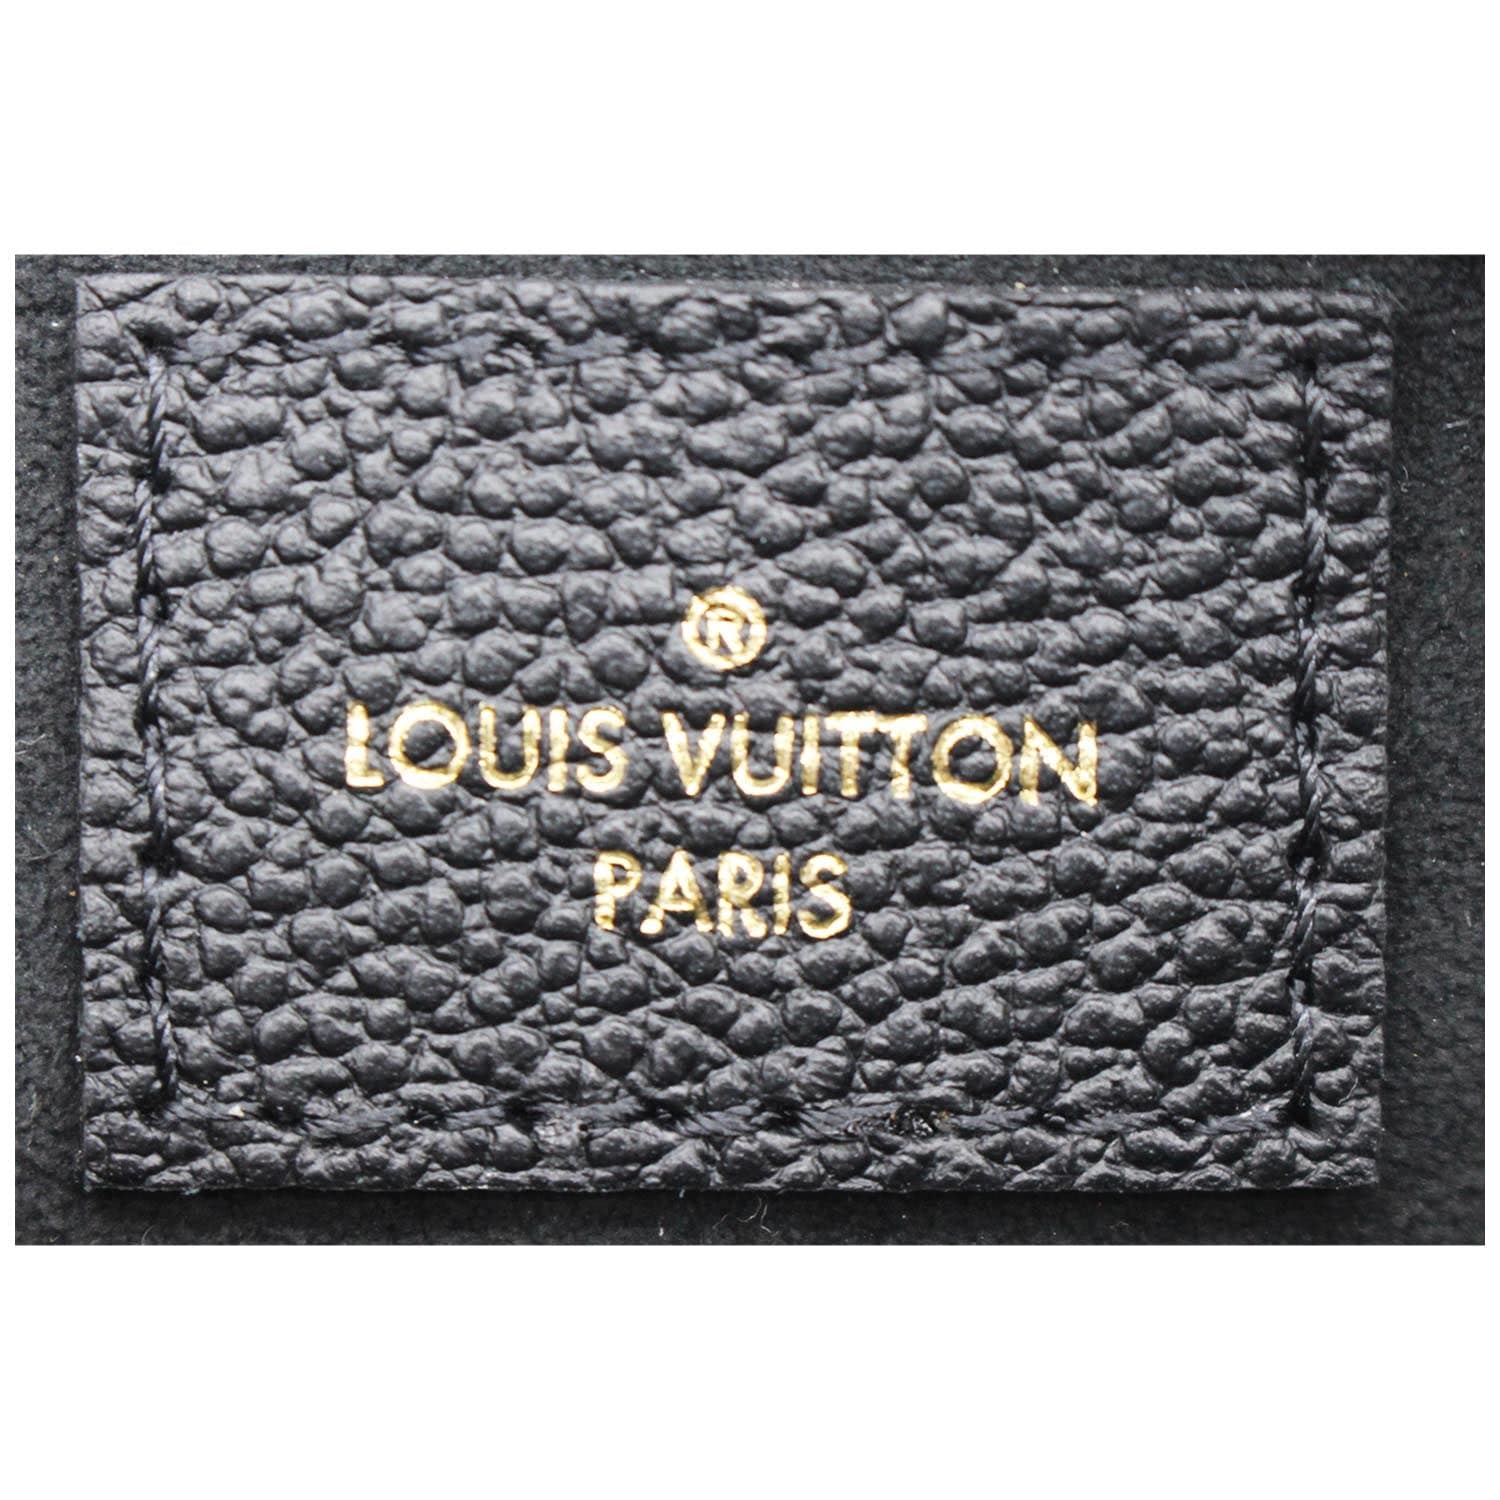 Are Louis Vuitton Wallets Made Of Leather Goods